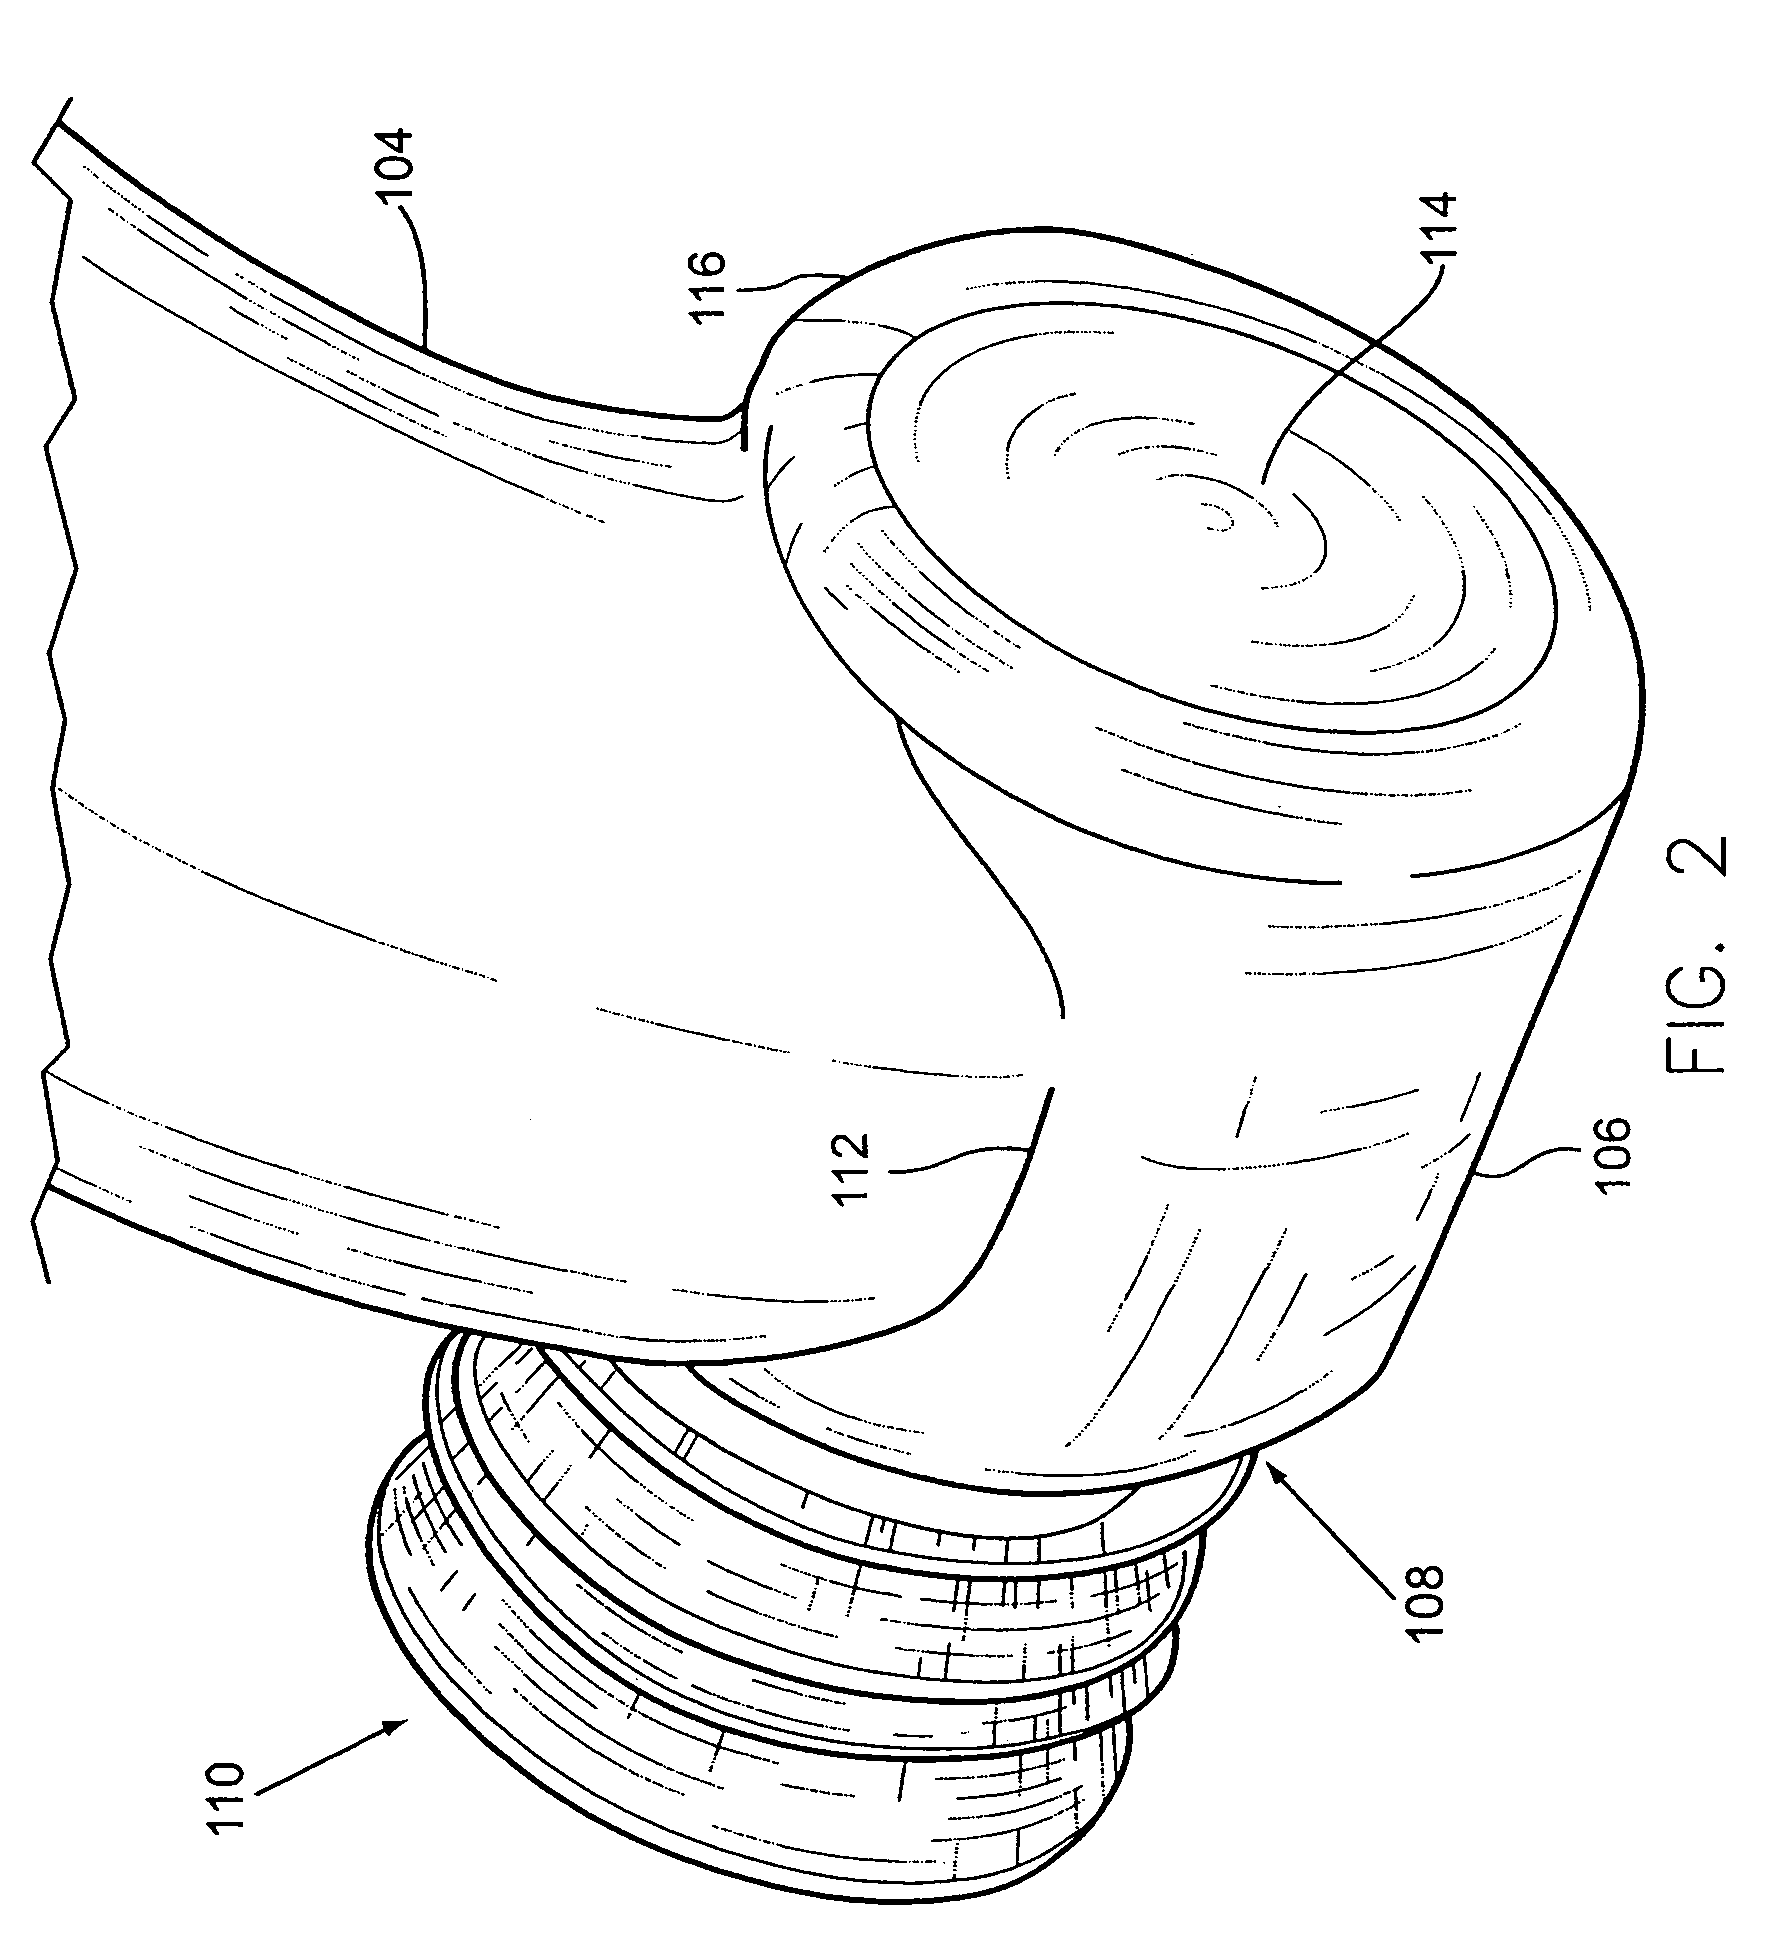 Apparatus for increasing induction air flow rate to a turbocharger